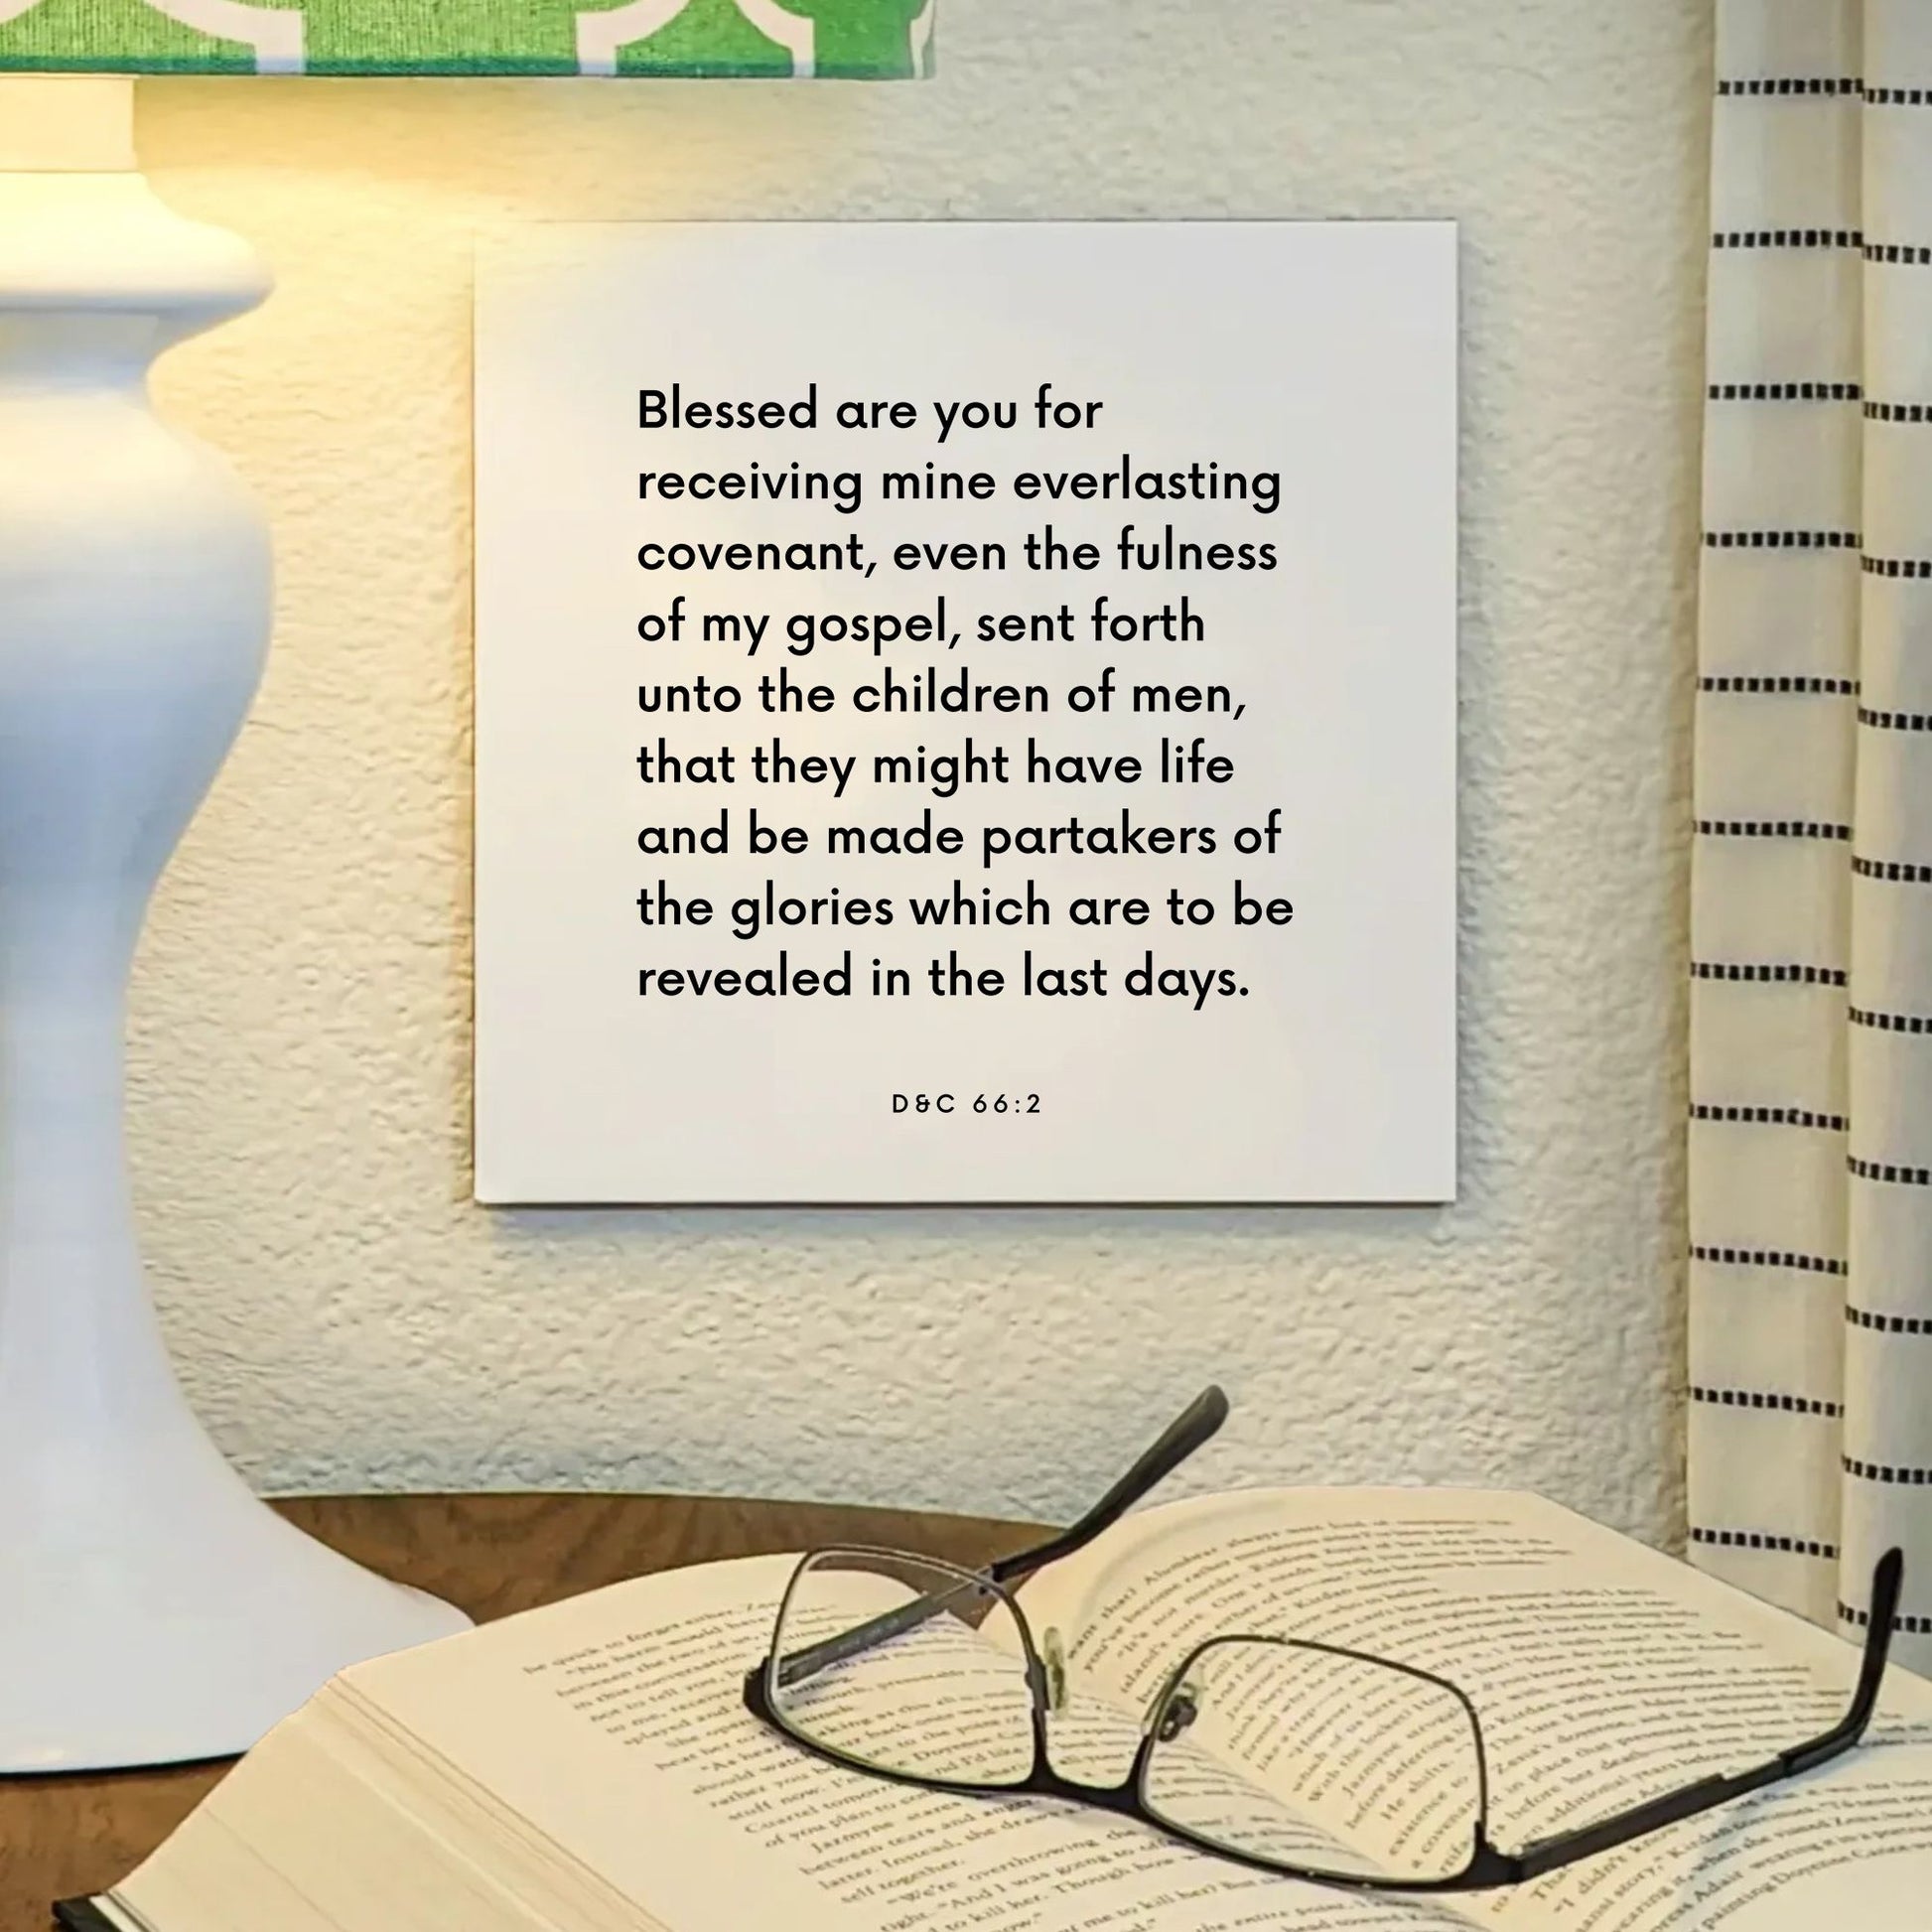 Lamp mouting of the scripture tile for D&C 66:2 - "Blessed are you for receiving mine everlasting covenant"